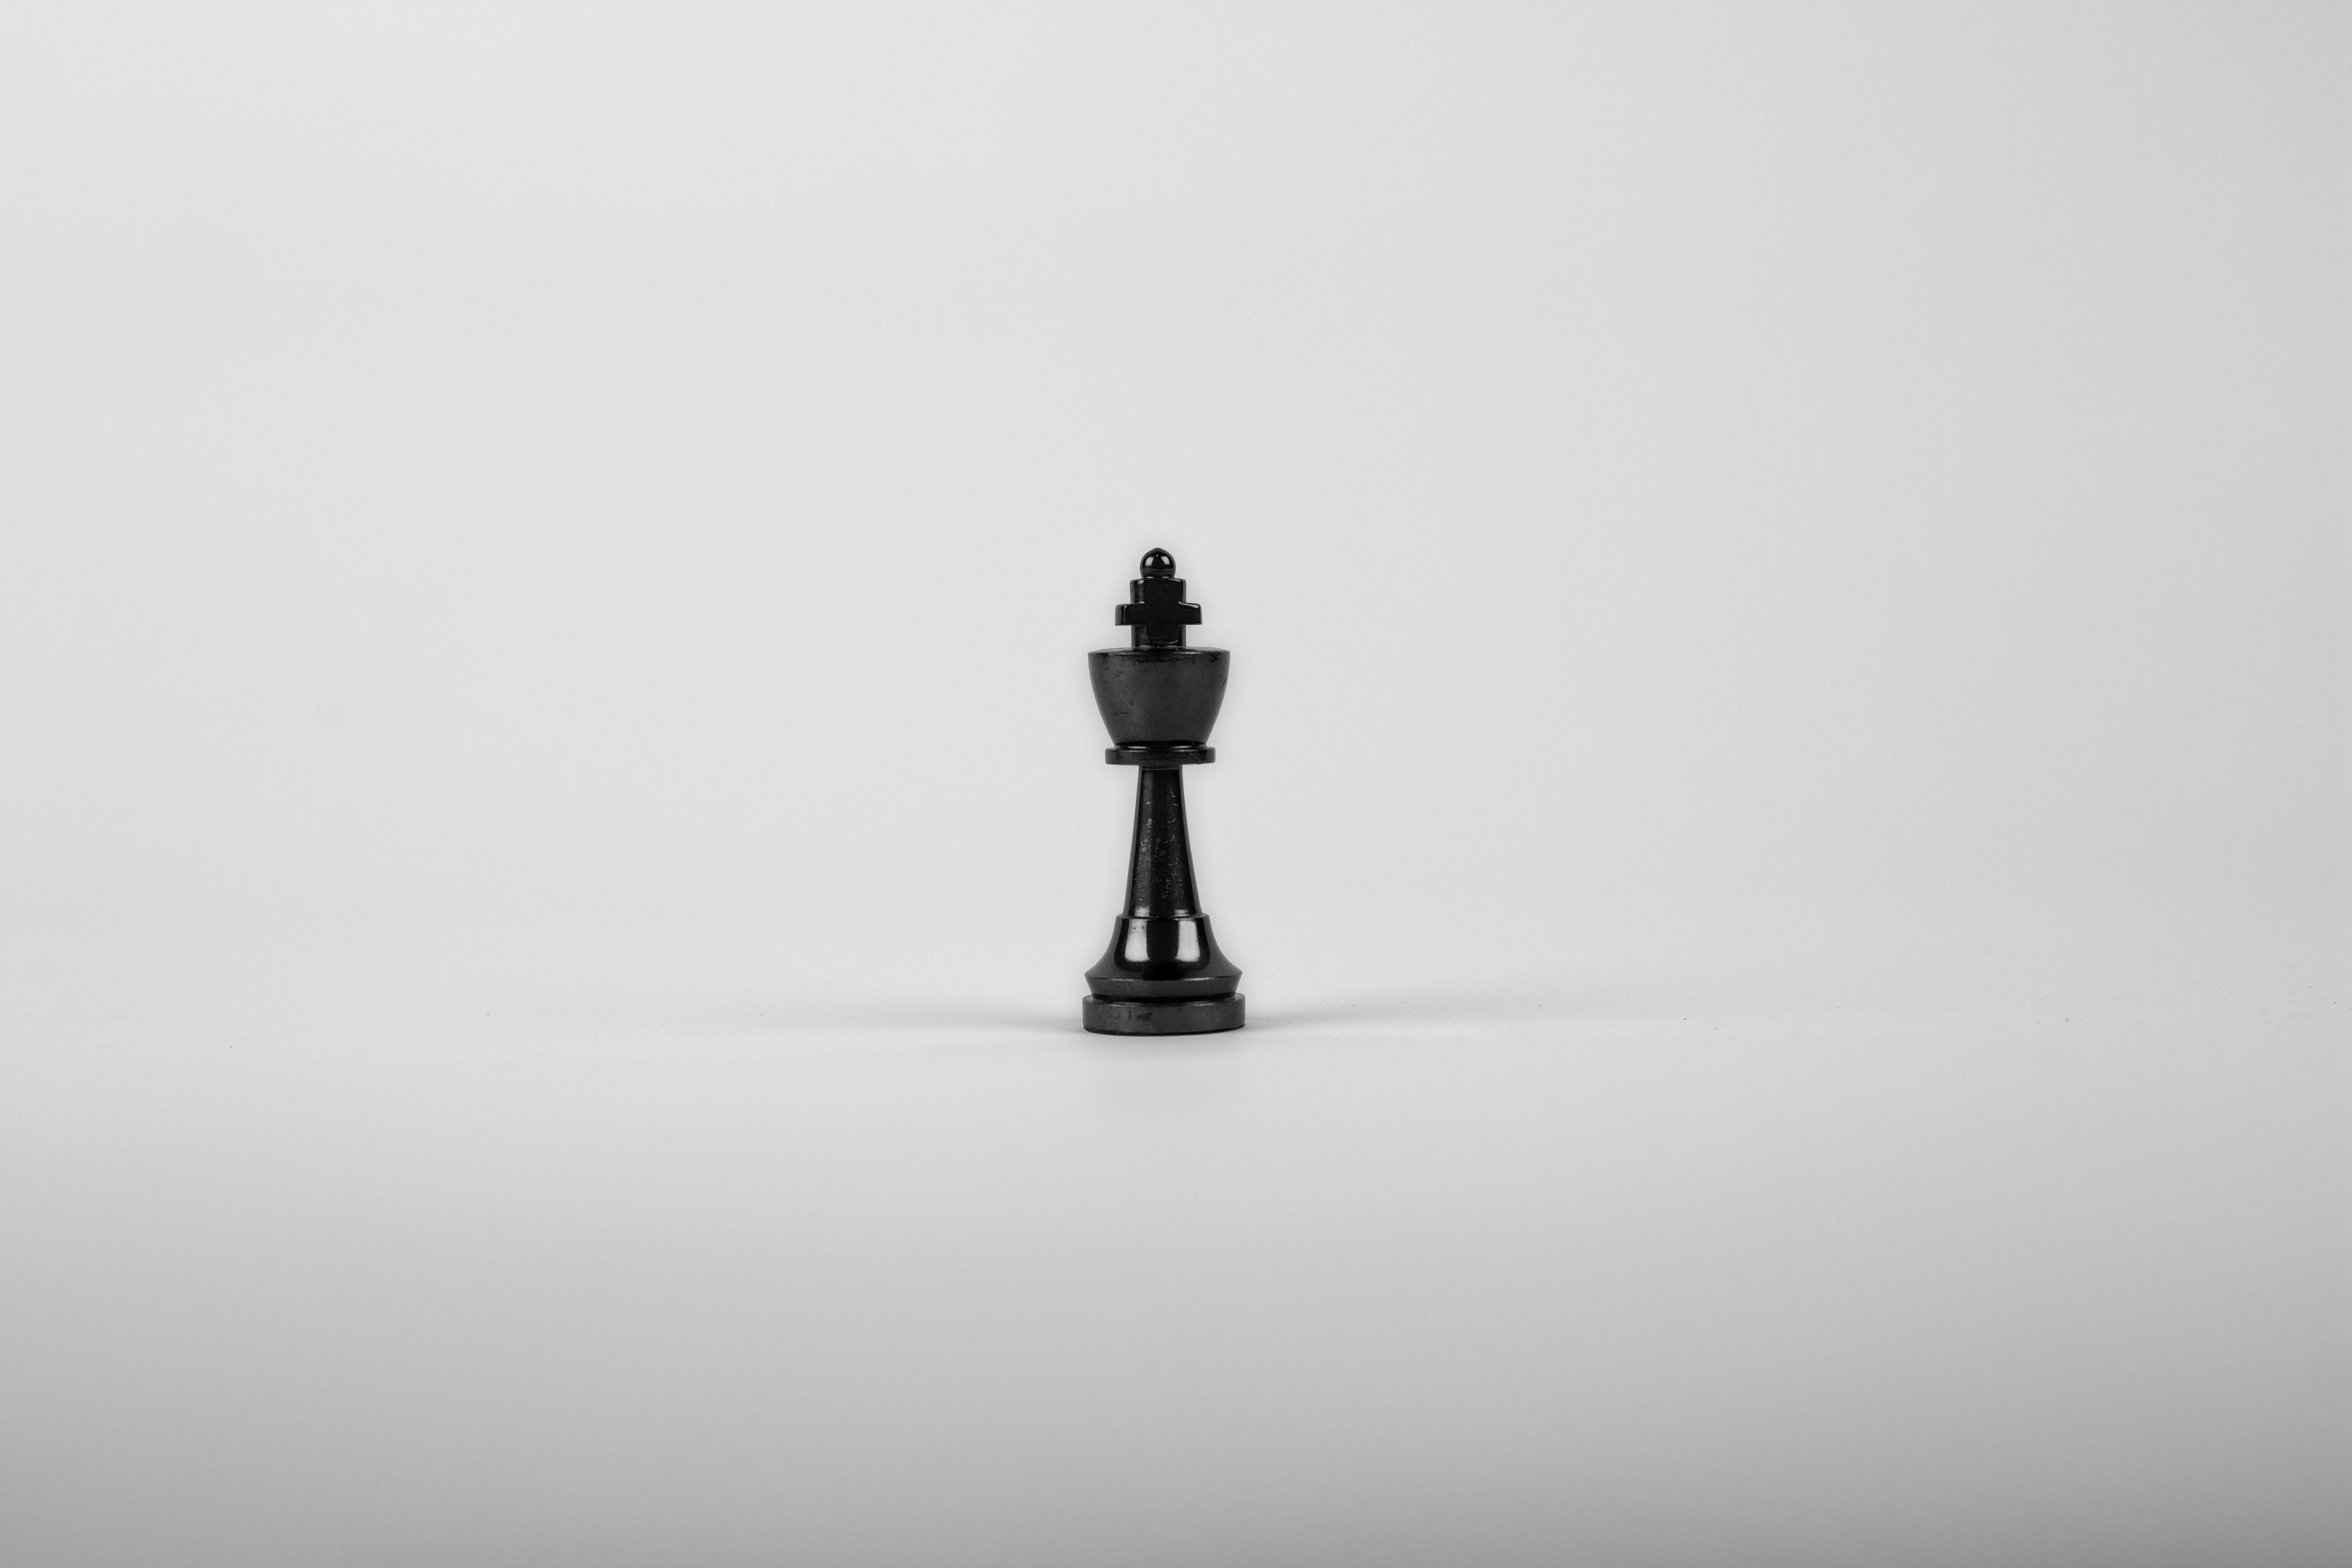 Chess King iPhone Wallpaper HD » iPhone Wallpapers